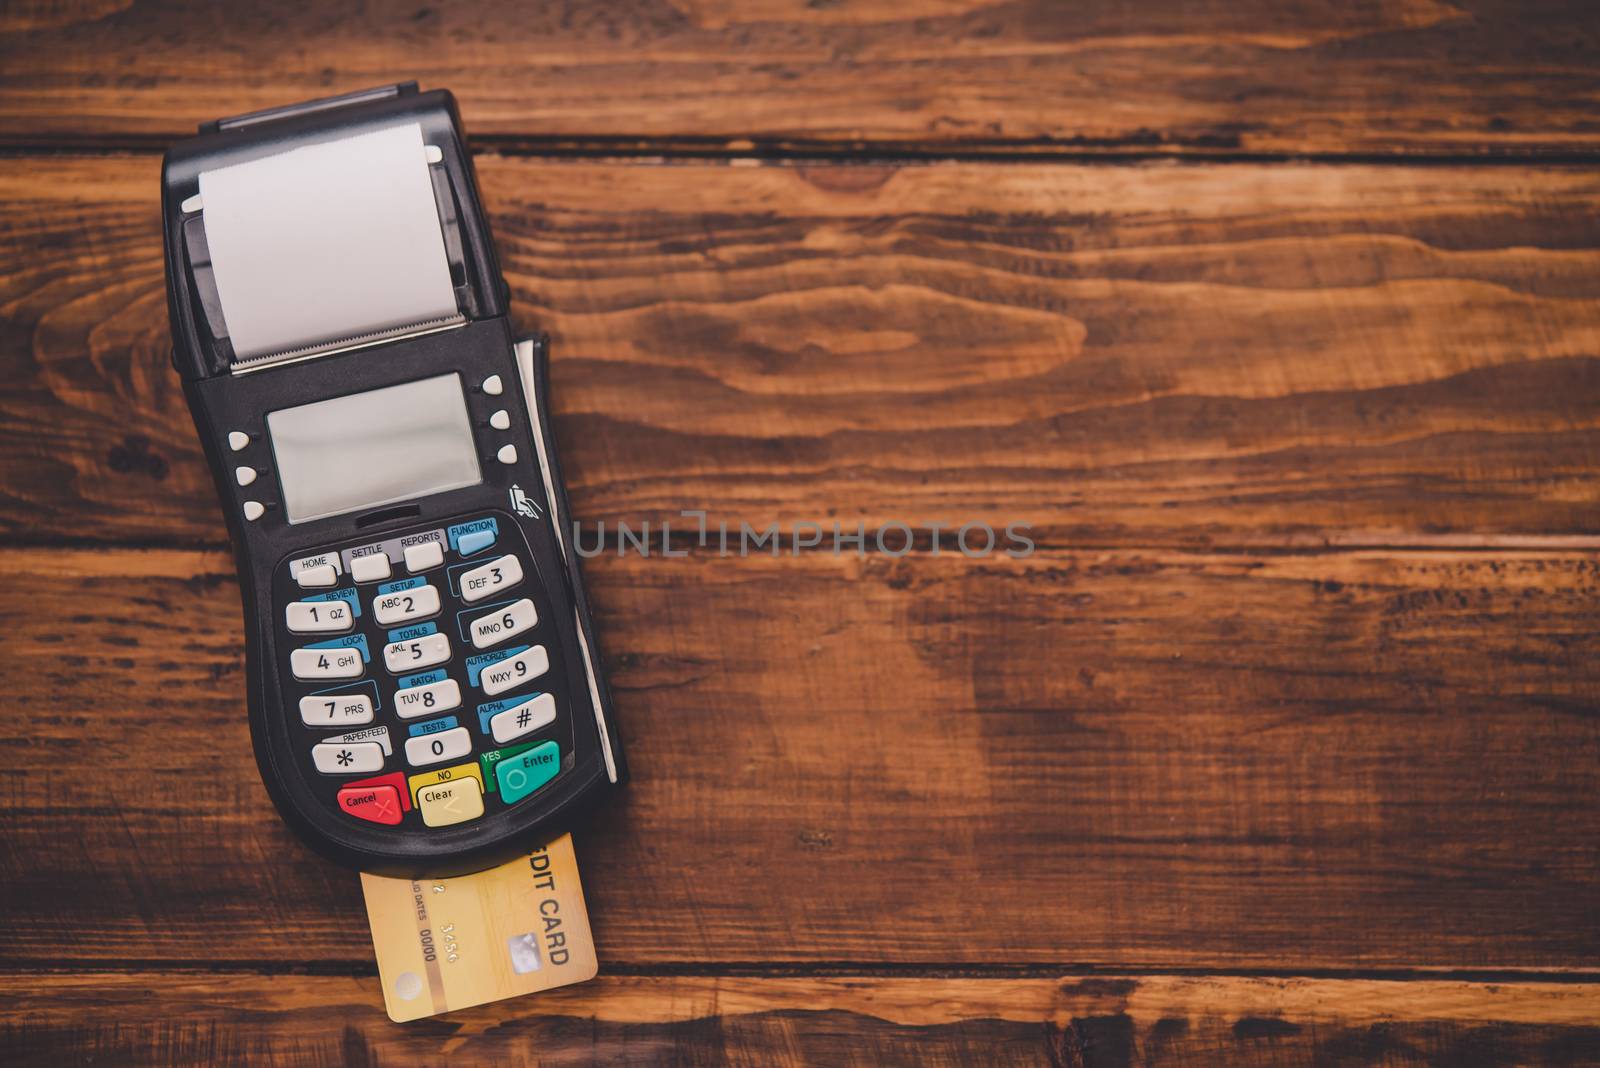  Top view credit card swipe machine placed on a wooden floor , M by photobyphotoboy